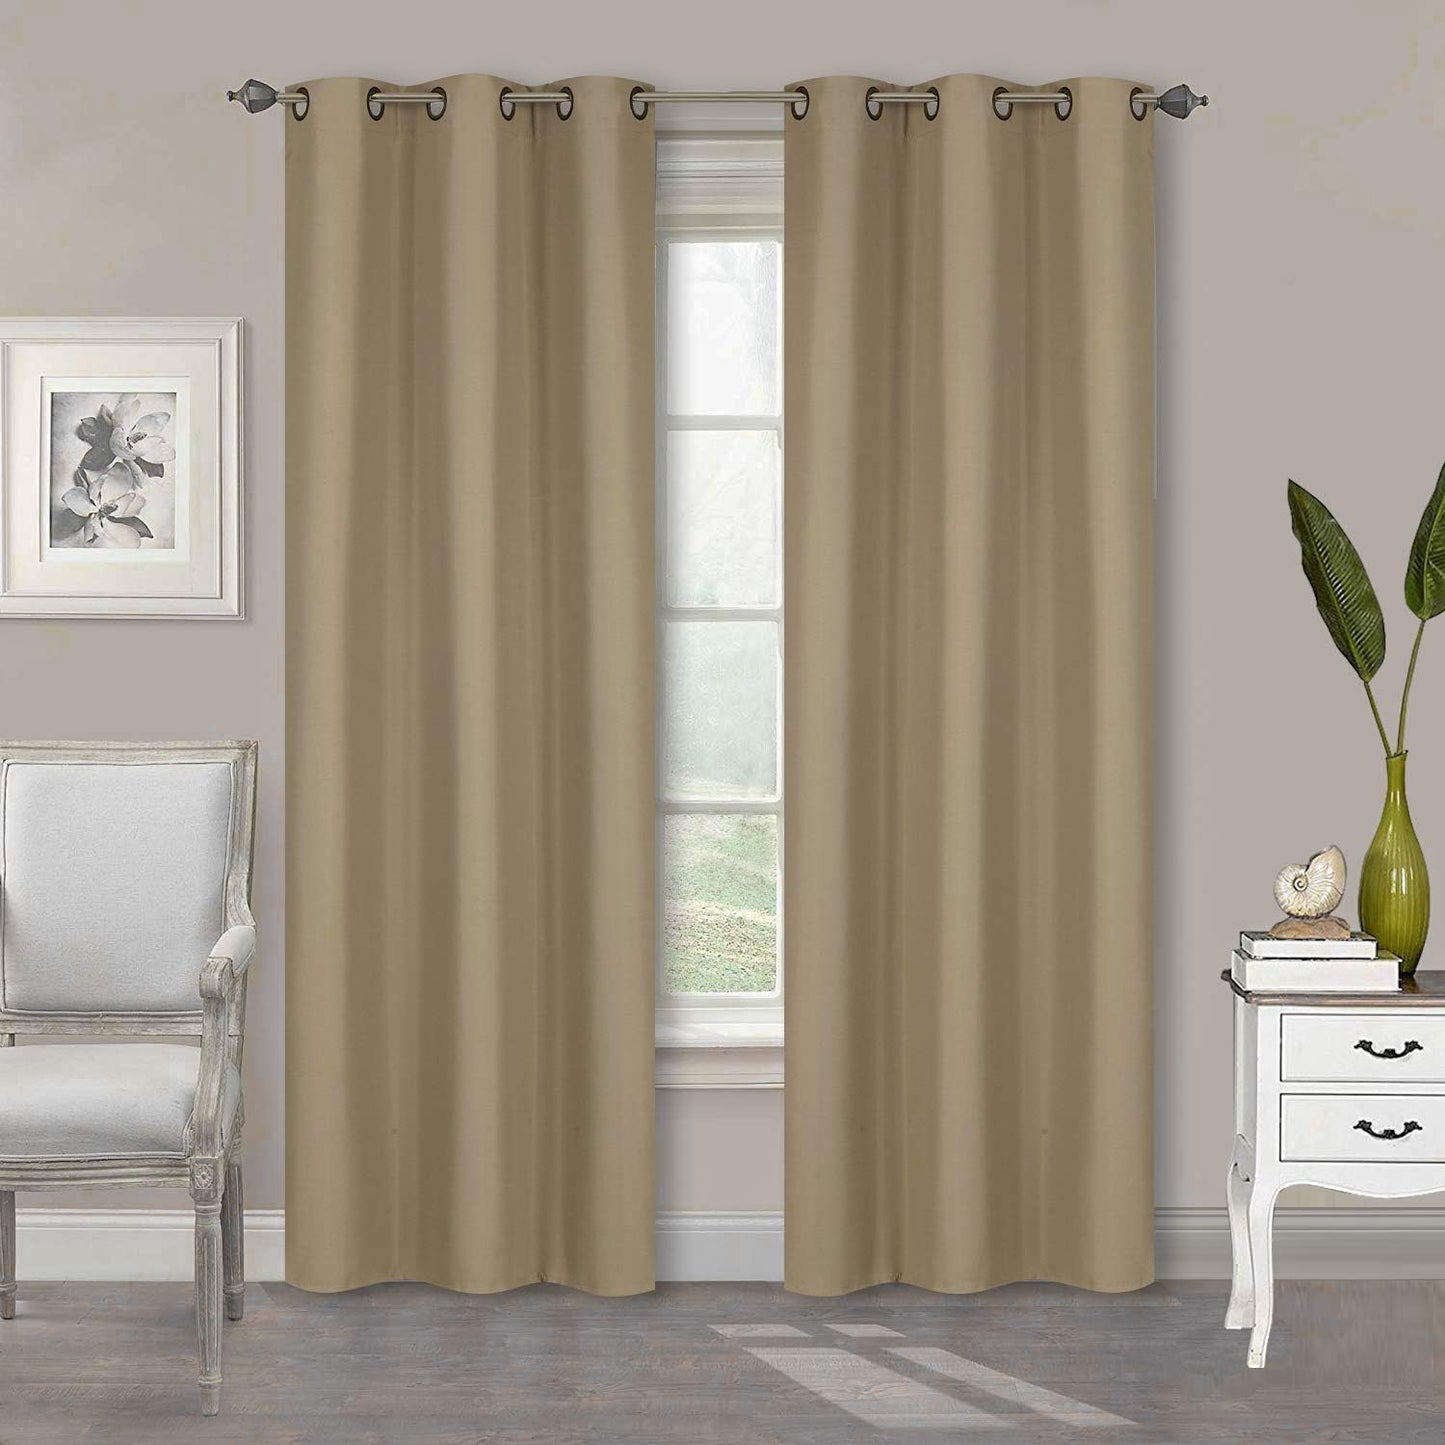 Home Collection 2 Panels 100% Blackout Curtain Set Solid Color with Rod Pocket Grommet Drapes for Kitchen, Dinning Room, Bathroom, Bedroom,Living Room Window New (74” Wide X 62” Long, Ivory)  Kids Zone home Linen Tan 74” Wide X 83” Long 